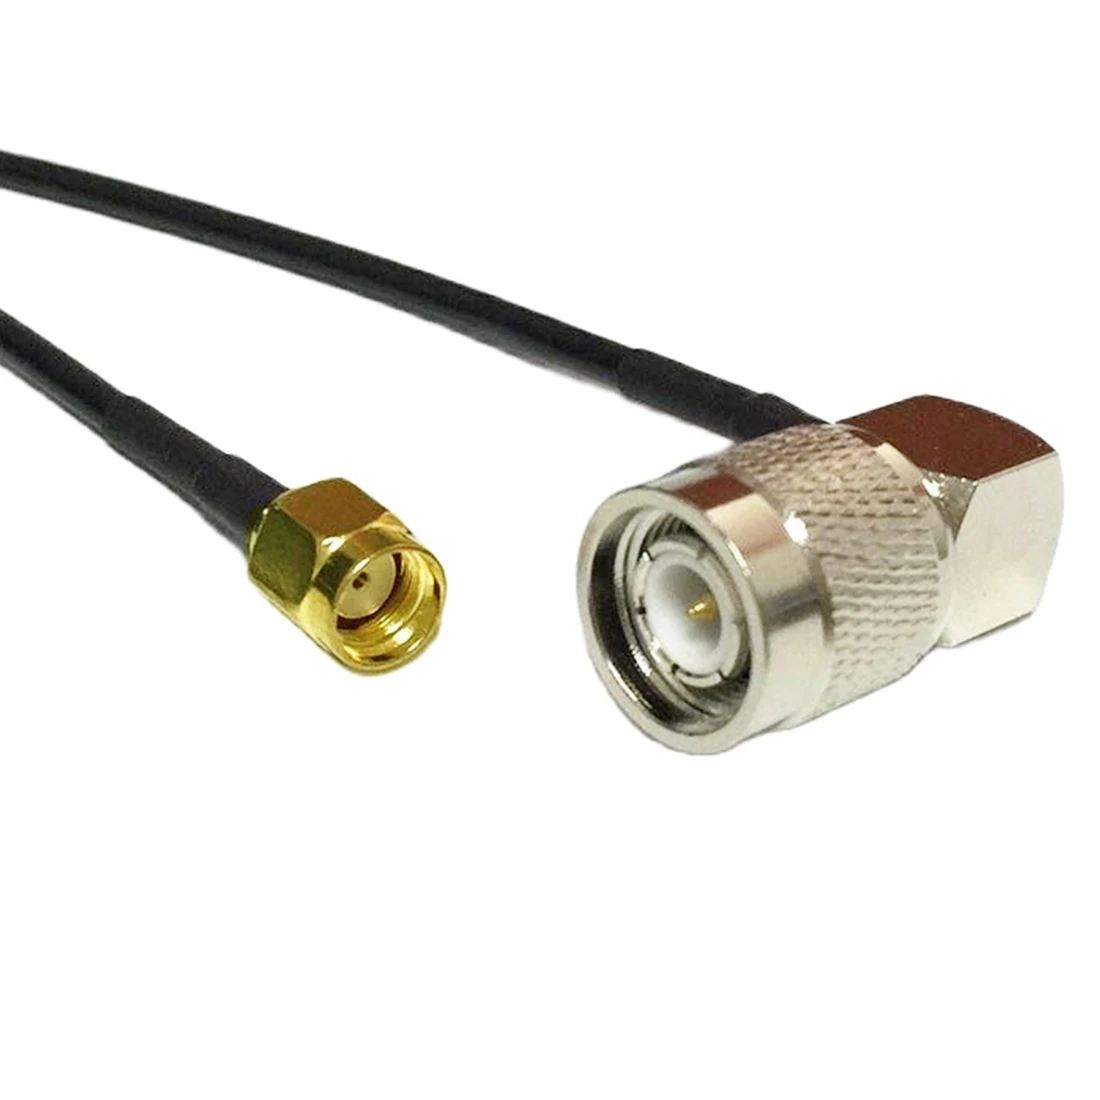 

Wireless Modem Cable RP SMA Plug To TNC Male 90 Degree Pigtail Adapter RG174 20cm 8" Wholesale Price